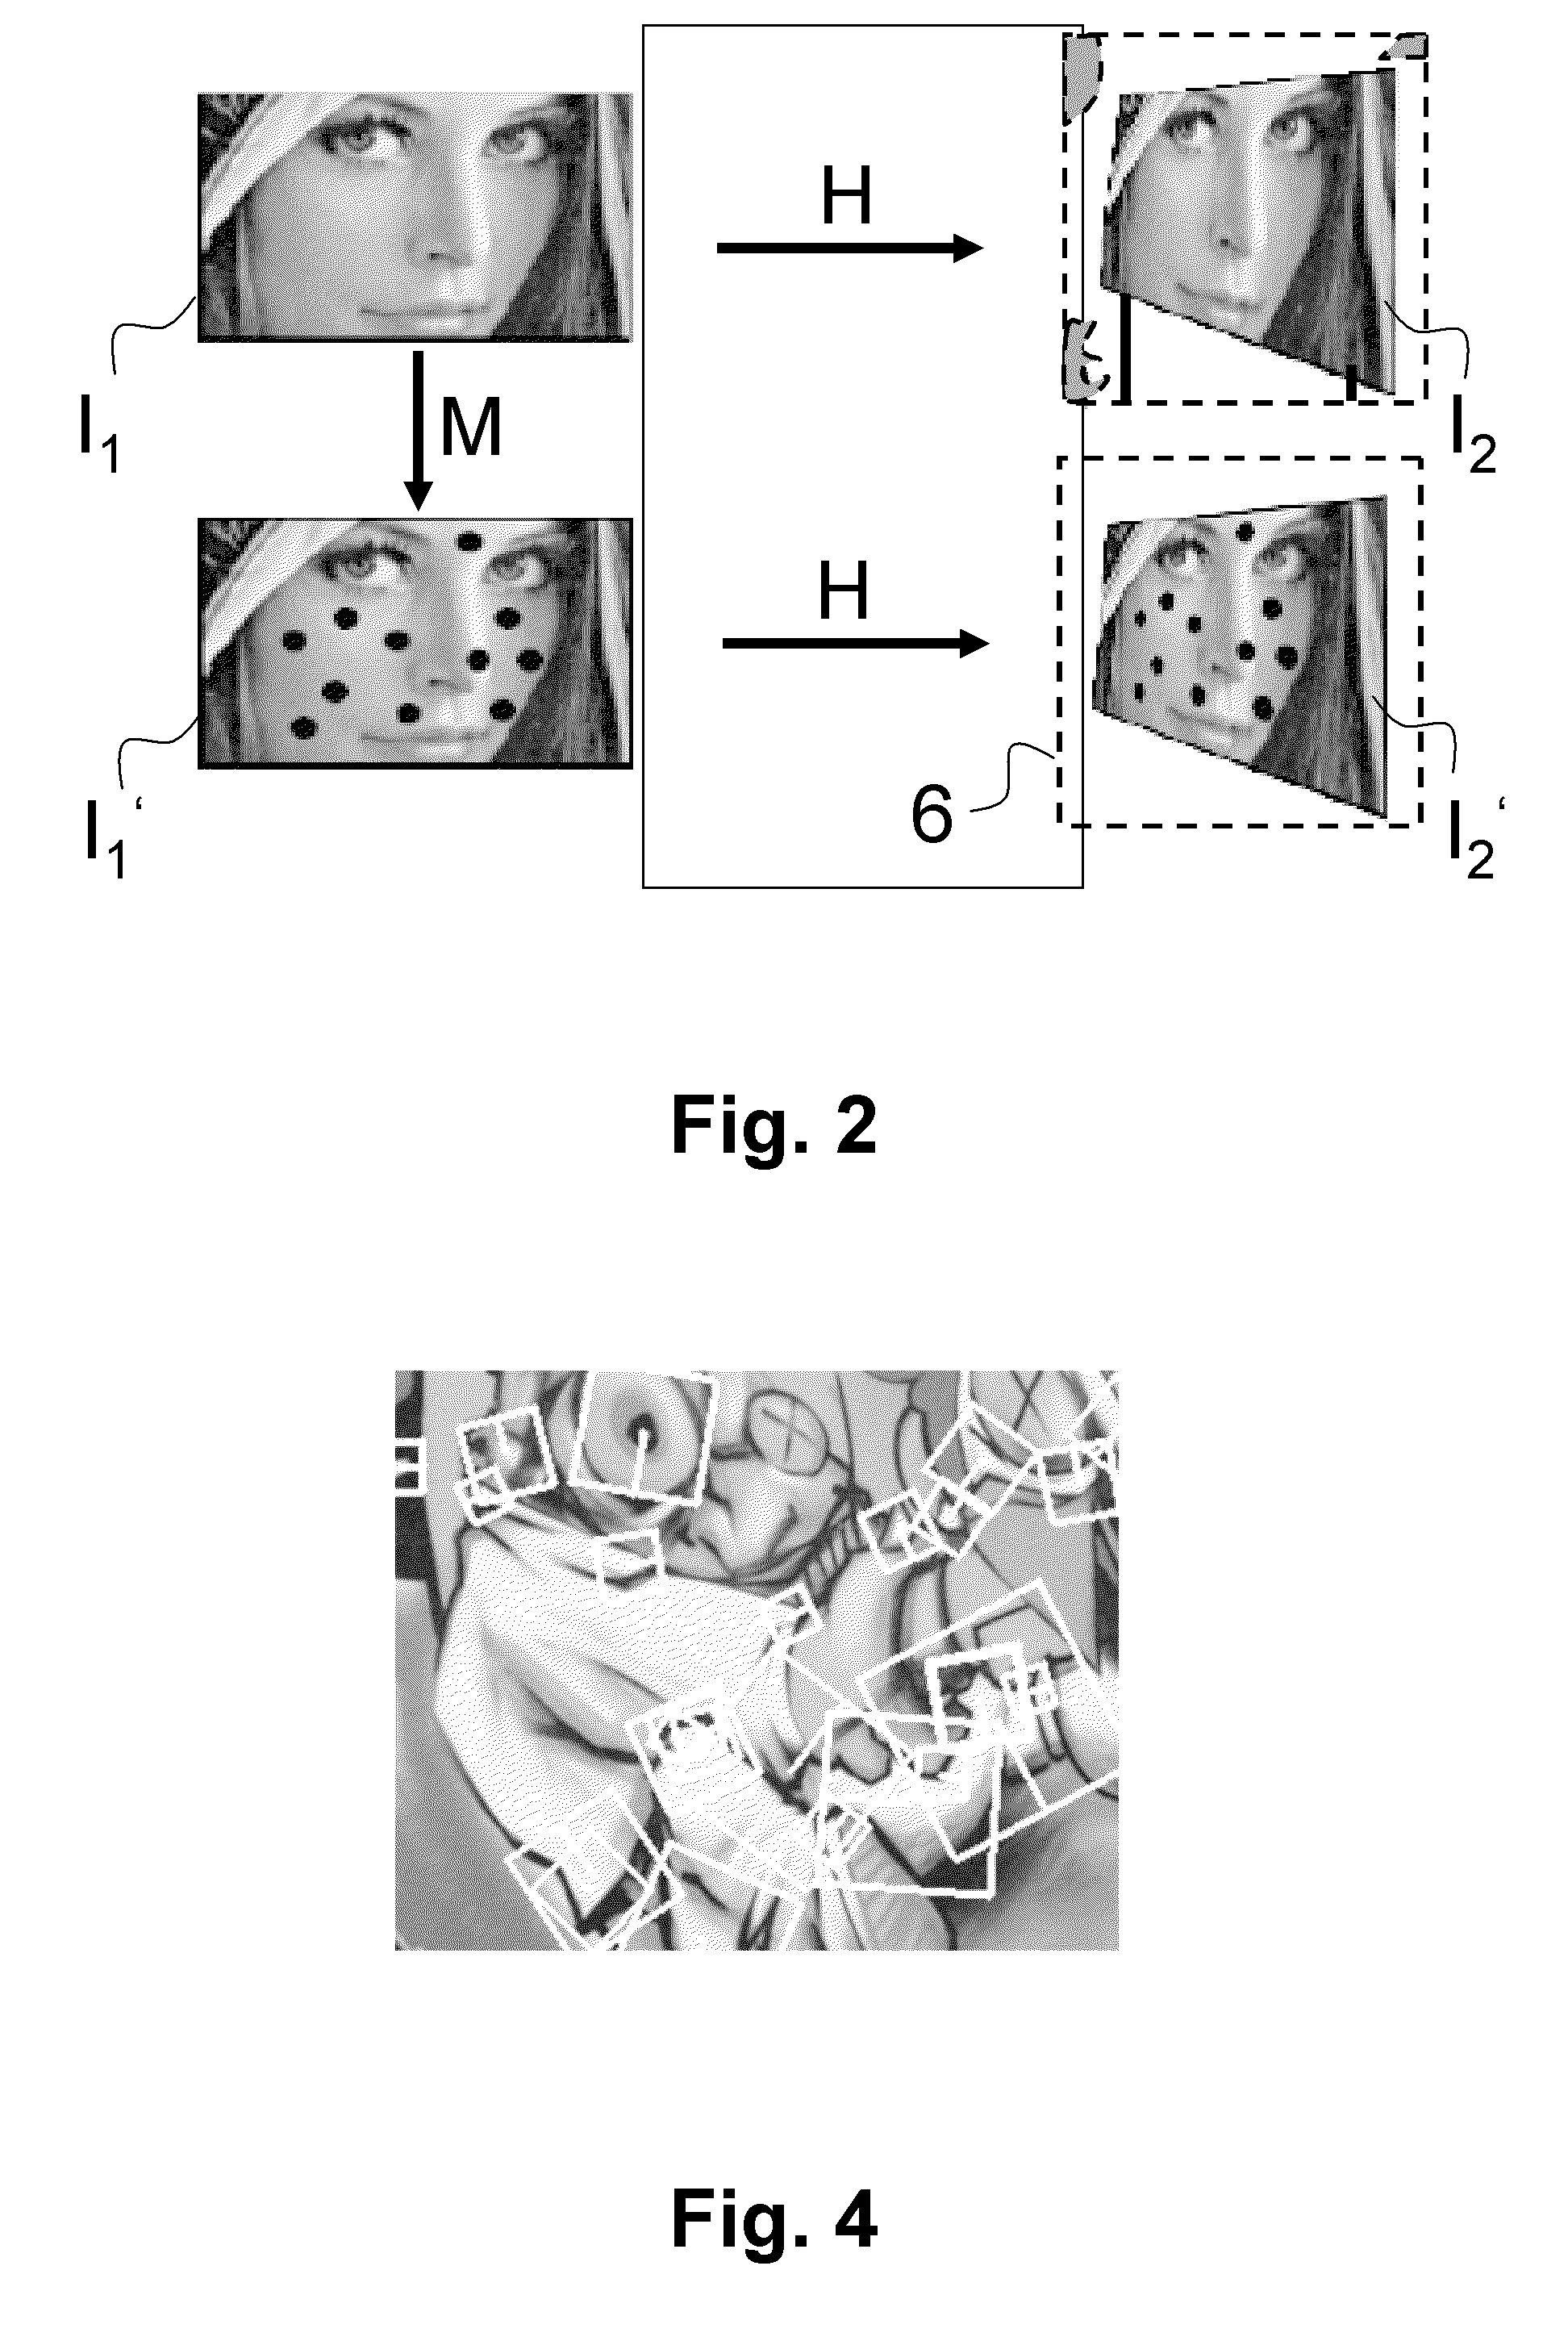 Method and system for image-based information retrieval